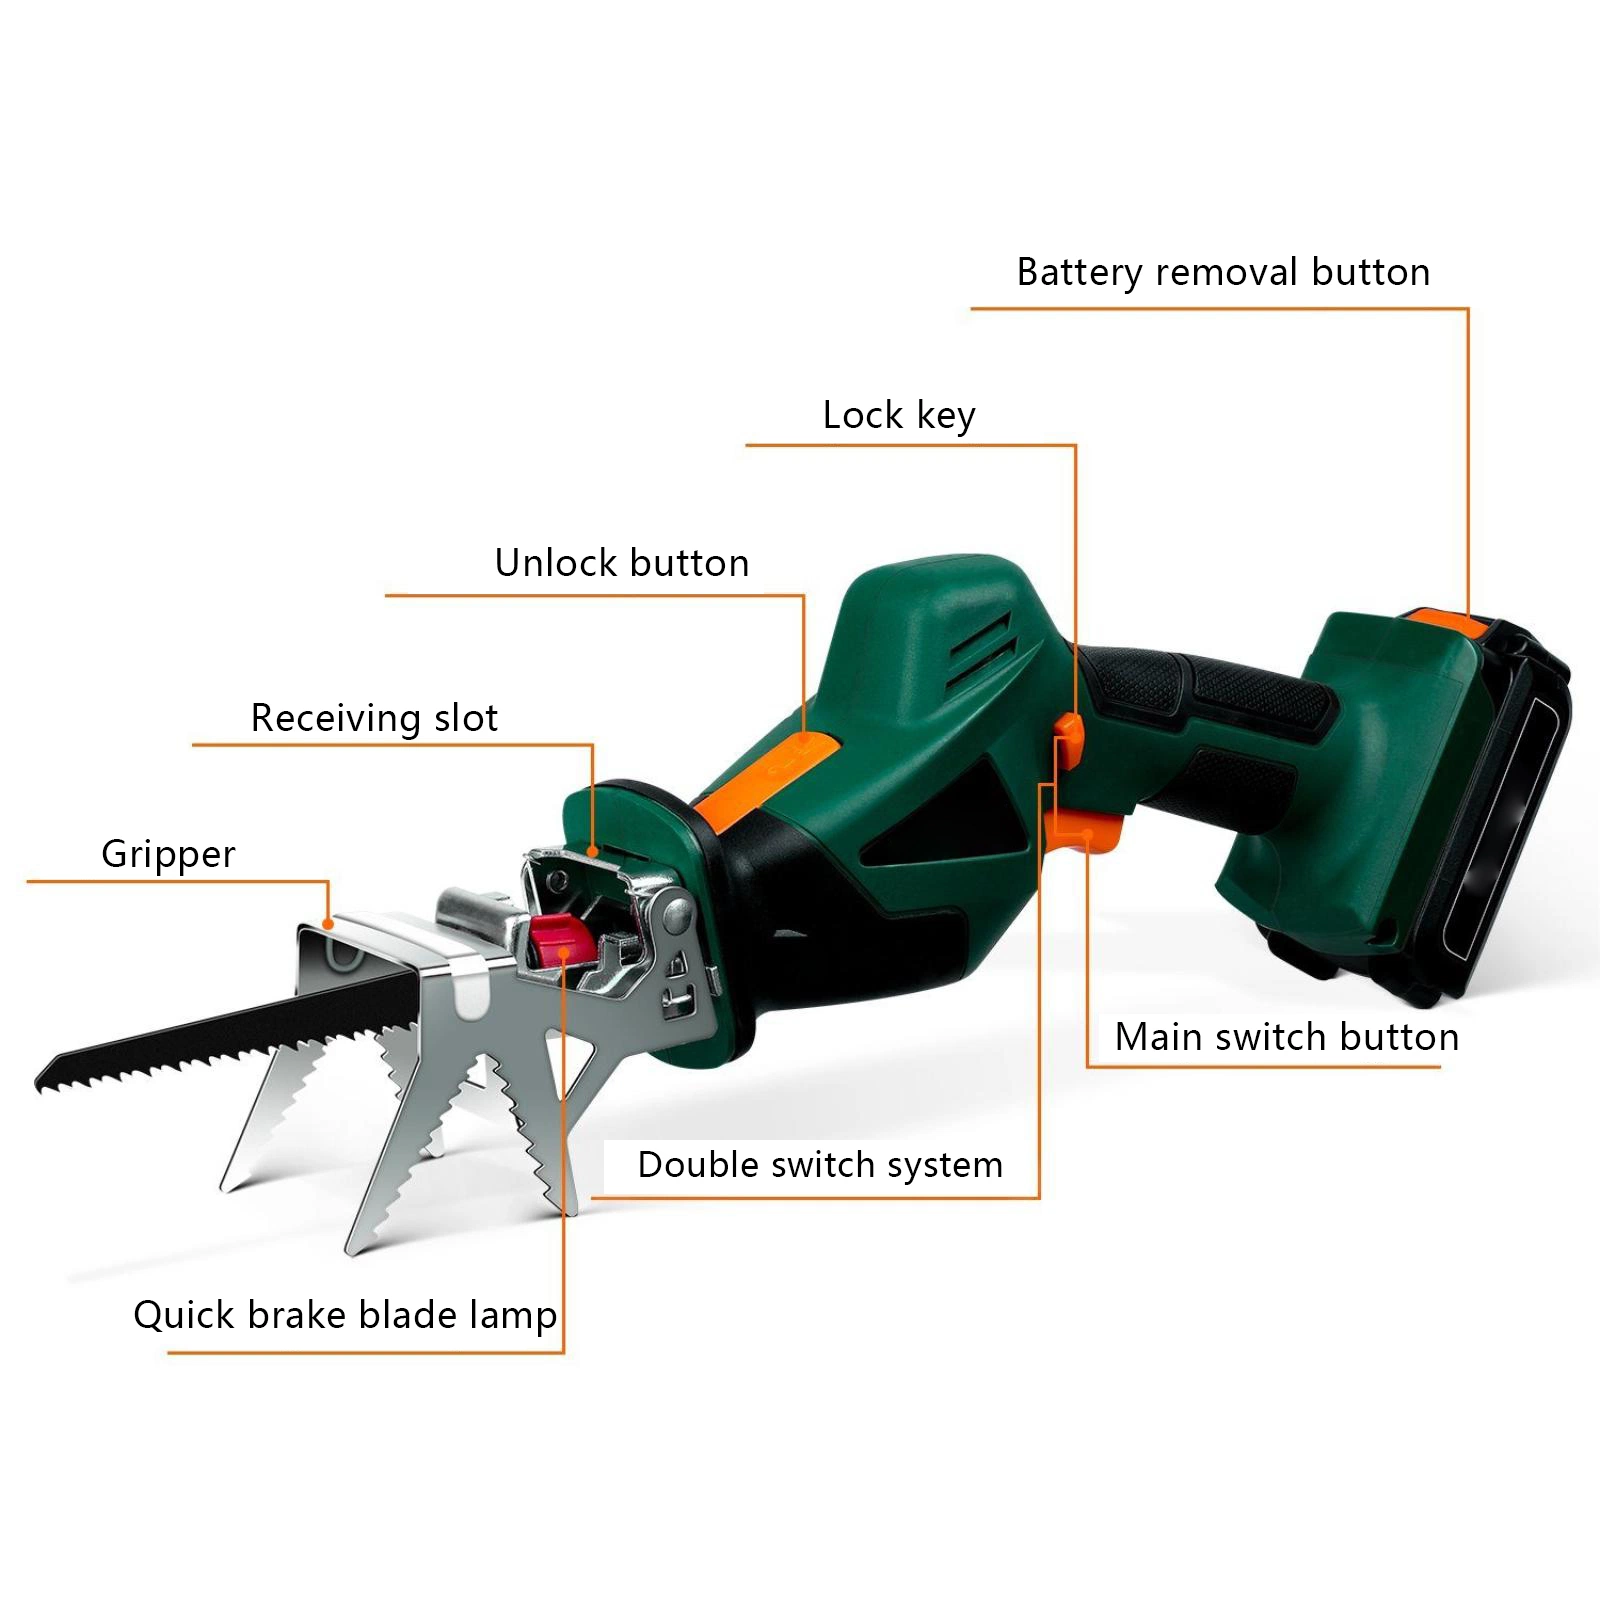 Reciprocating Saws for Wood Panel Saw Machine Kit 12V 3300 Cordless Metal Cutting Portable Adapter Electric Drill